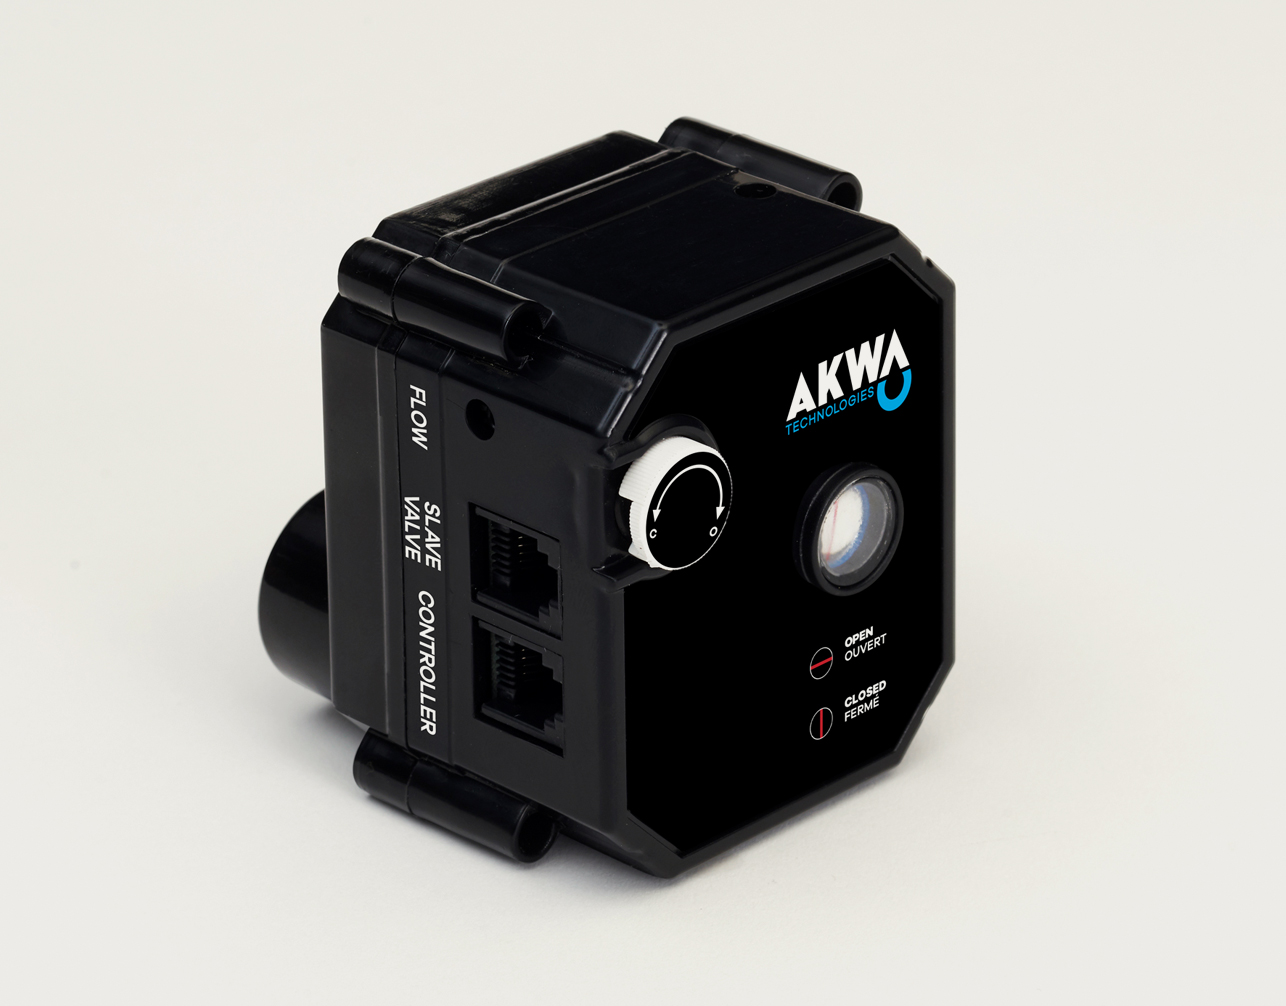 The AKWA Master valve is an automatic shut-off valve which can be installed Indoor or Outdoor